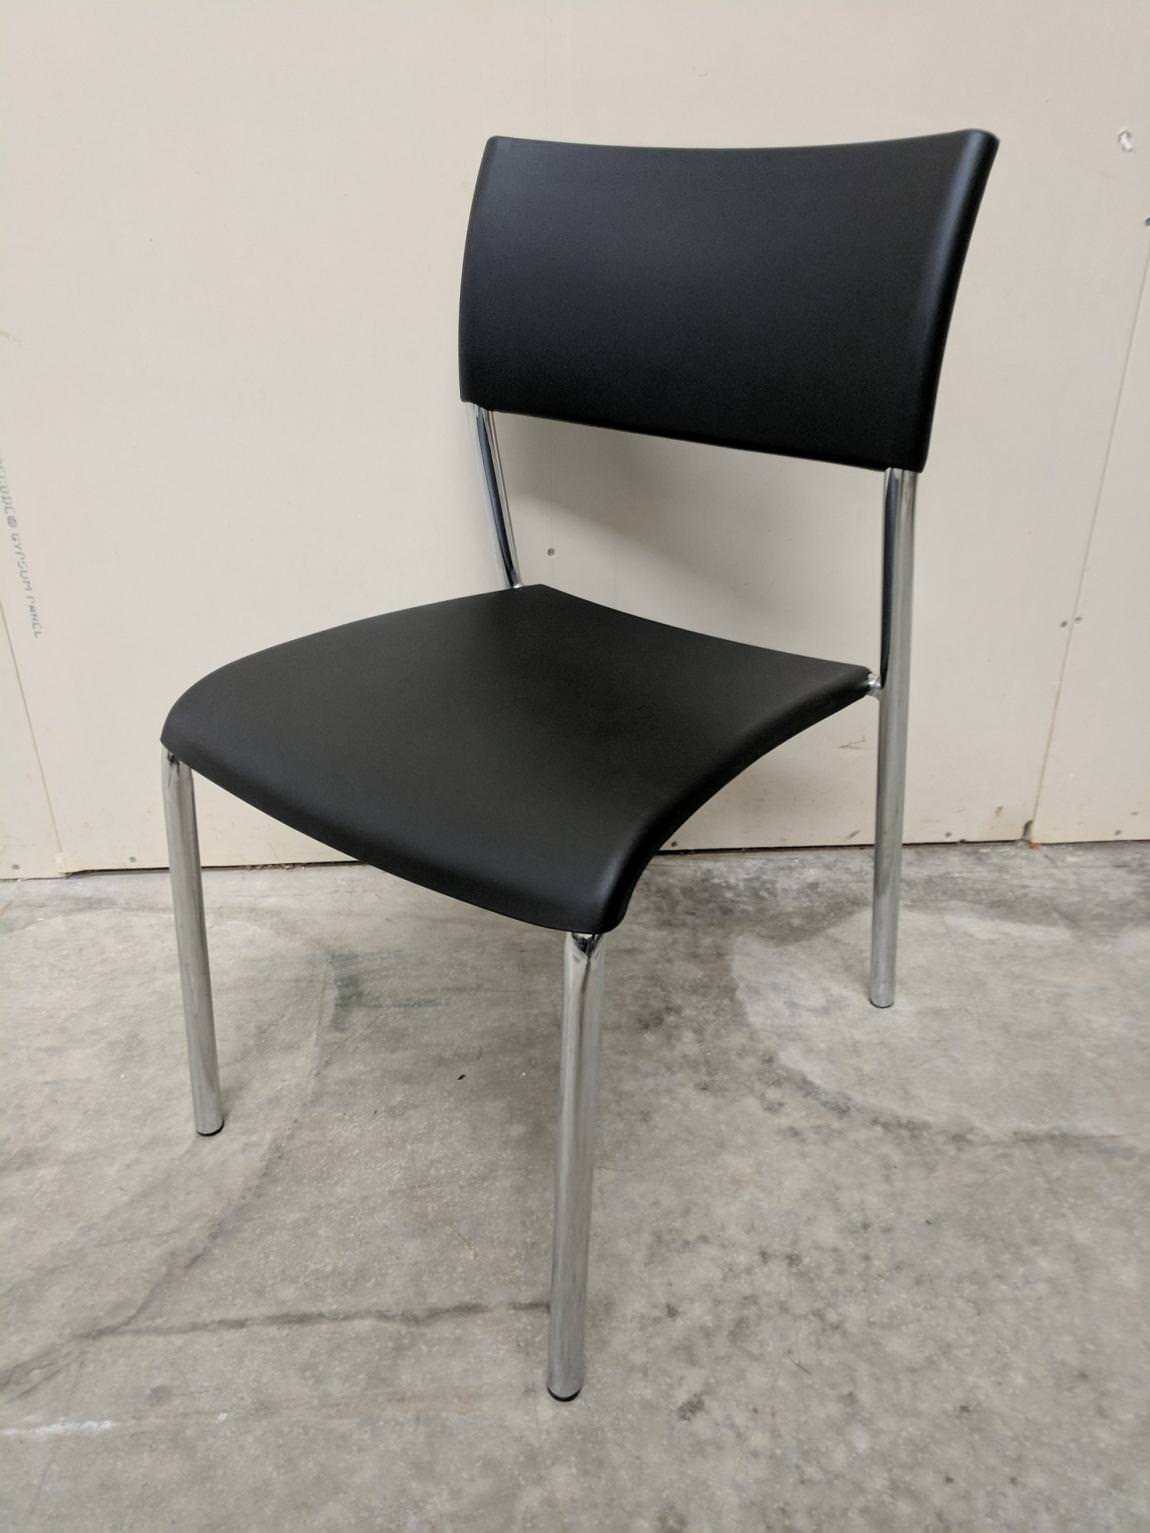 Offices To Go Black Plastic Stacking Guest Chairs 